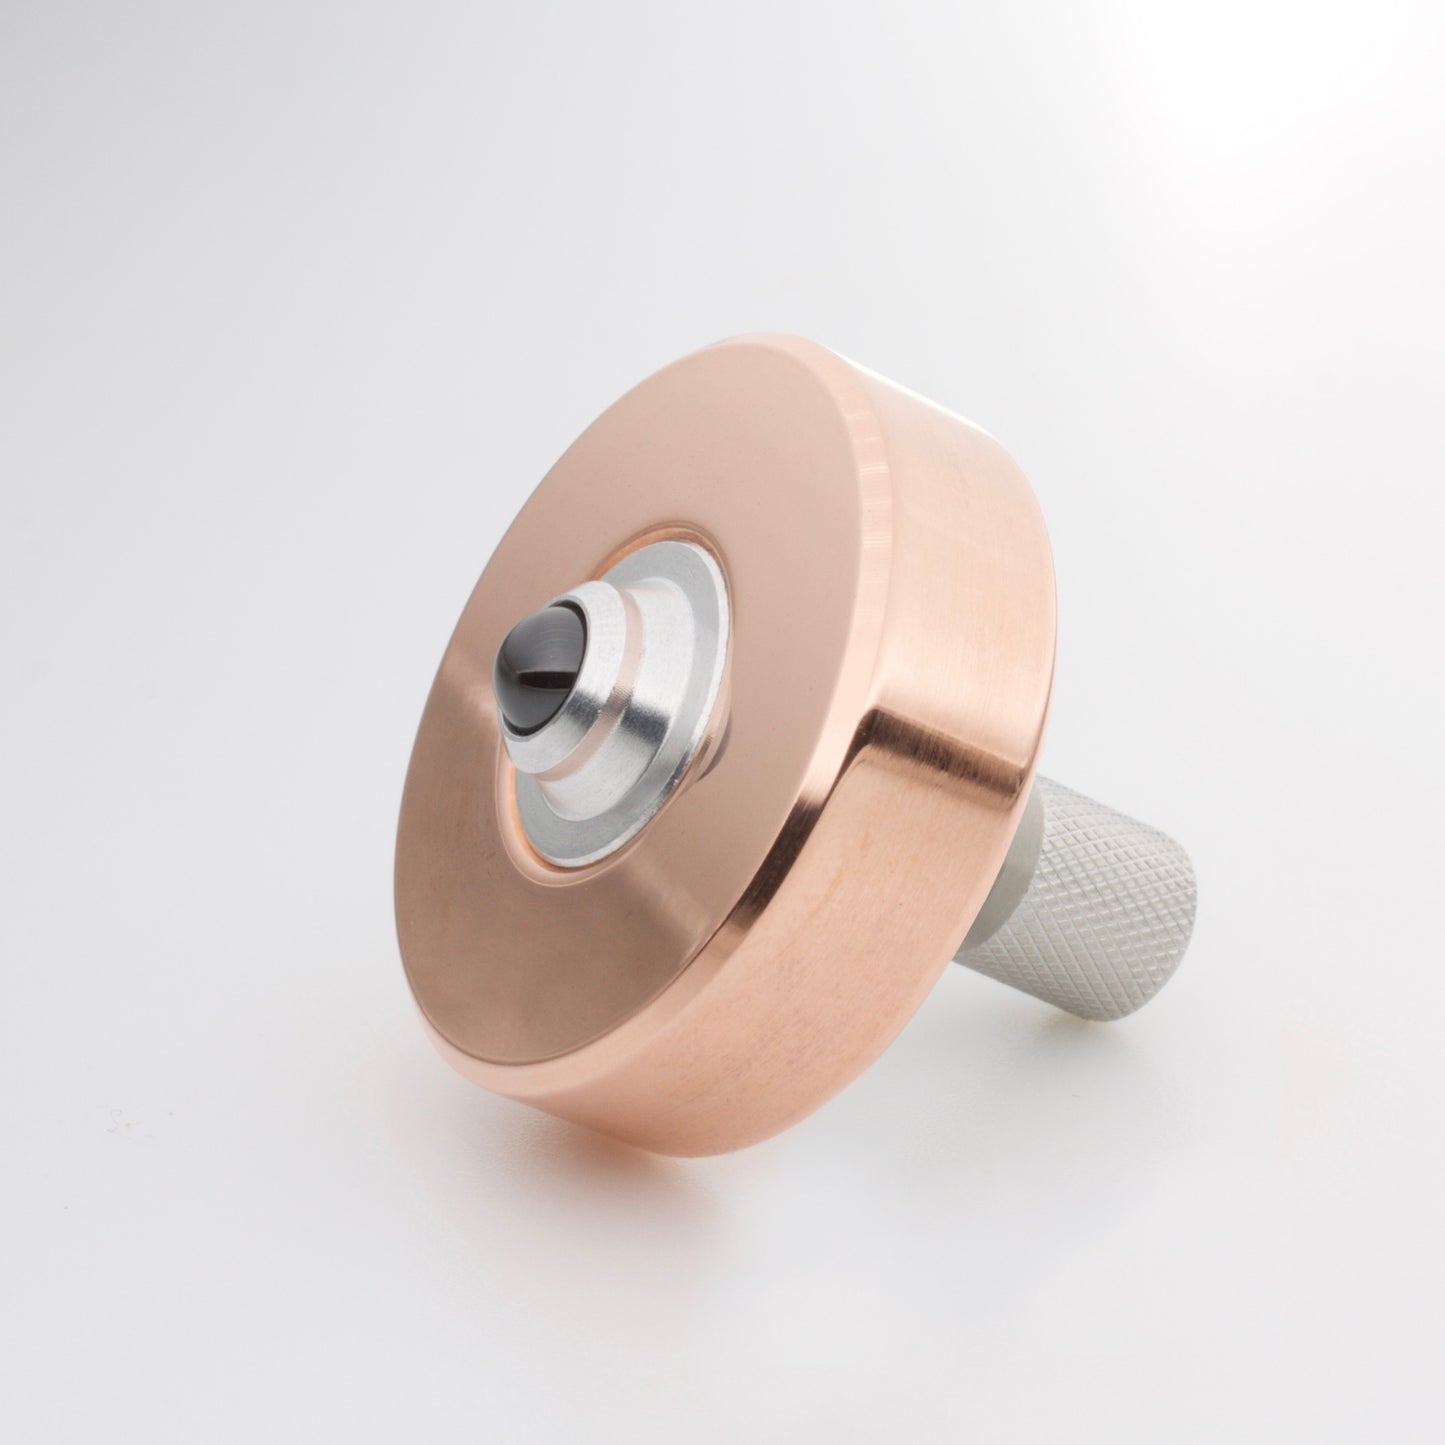 Copper & Stainless Mixed Metal Mk1 Spinning Top